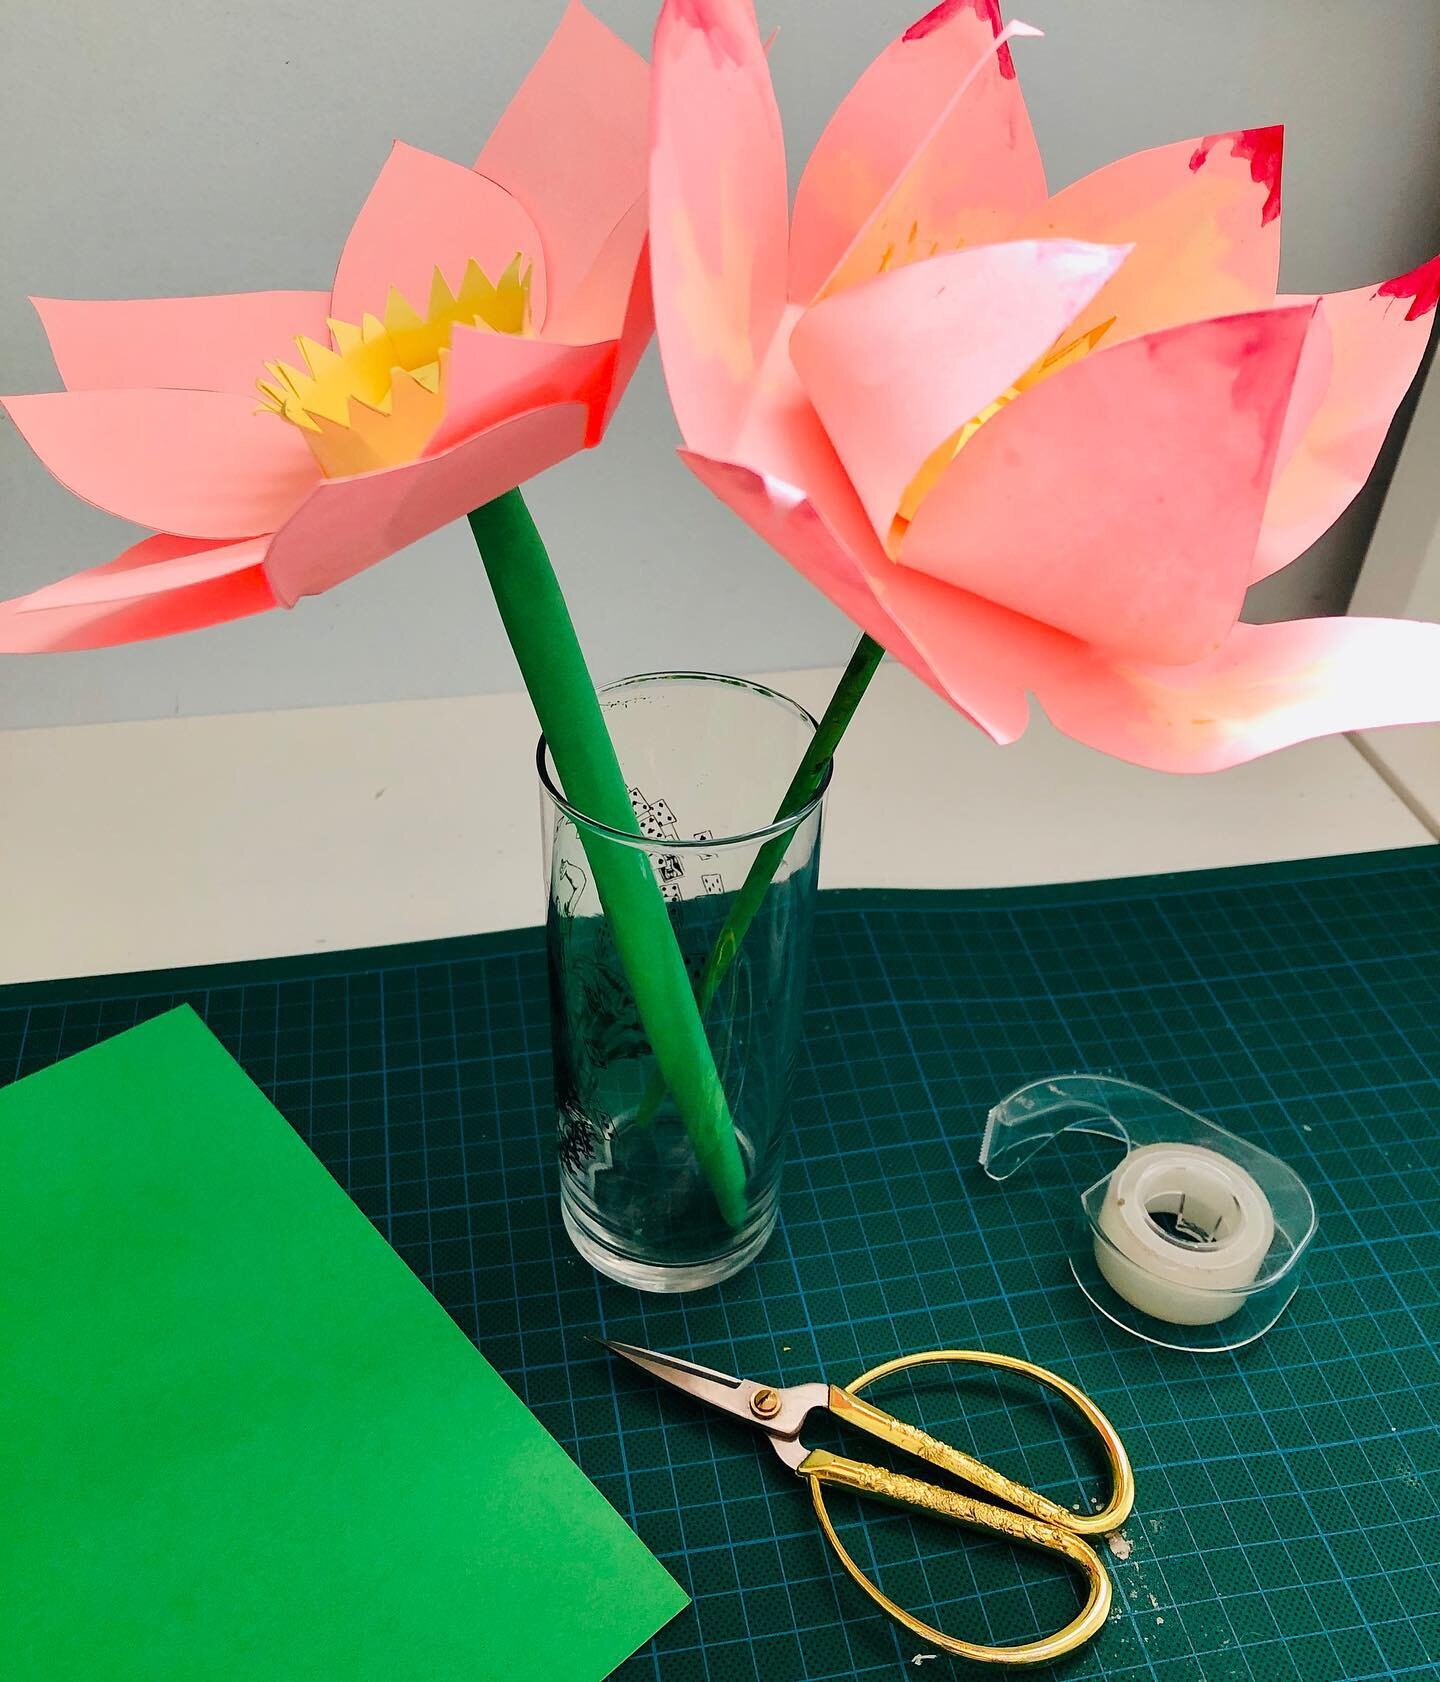 Teaching children how to make a simple lotus flower on zoom. Just find yourself some paper, scissors, glue and tape. #papercrafts #kidsactivities #paperflowers